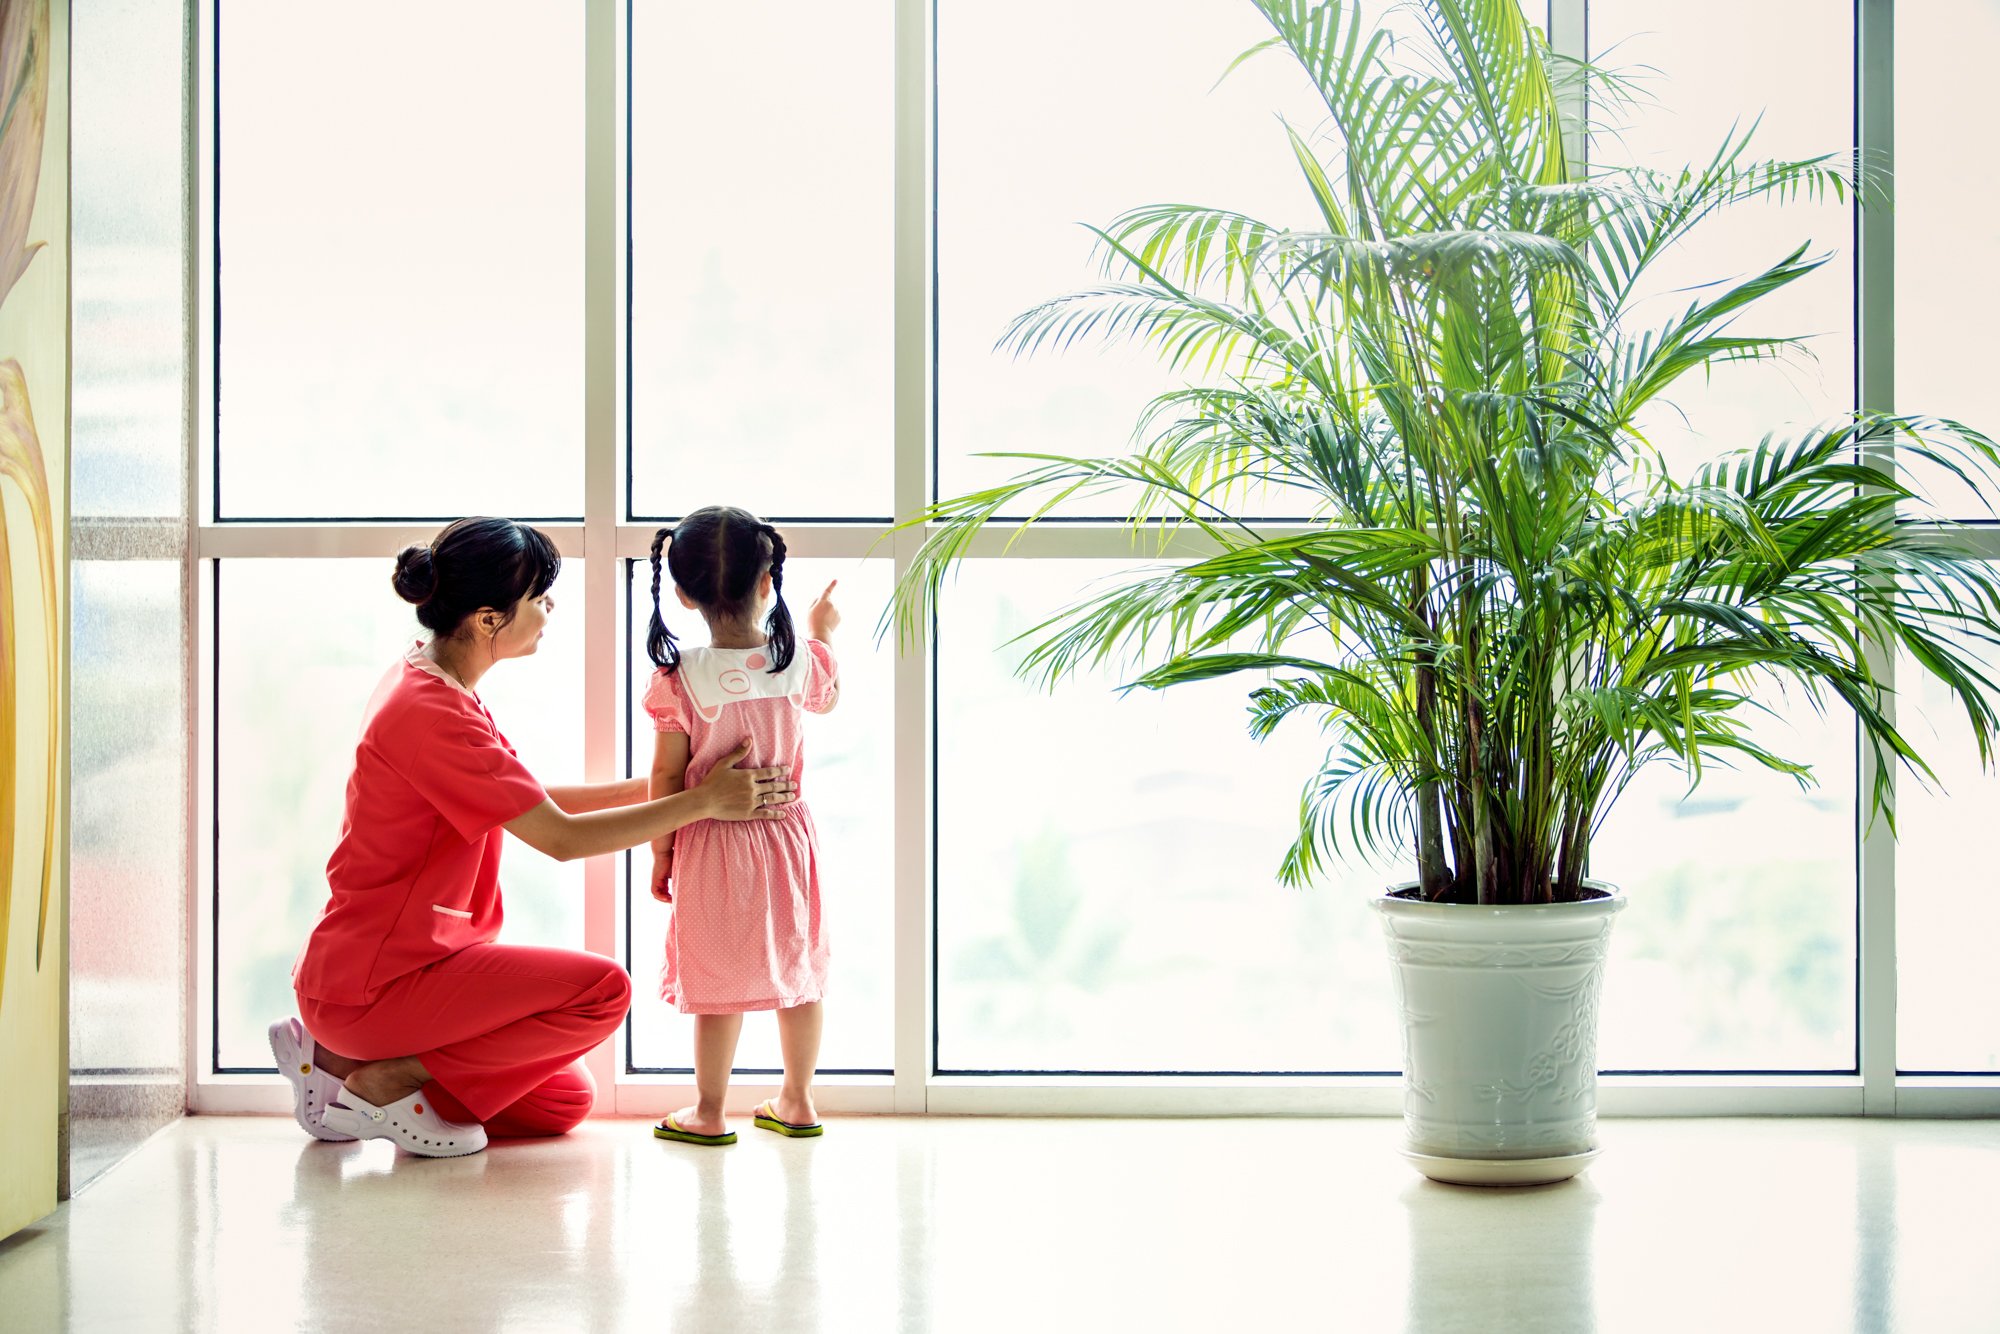 Nurse kneeling down and looking out window with young girl.